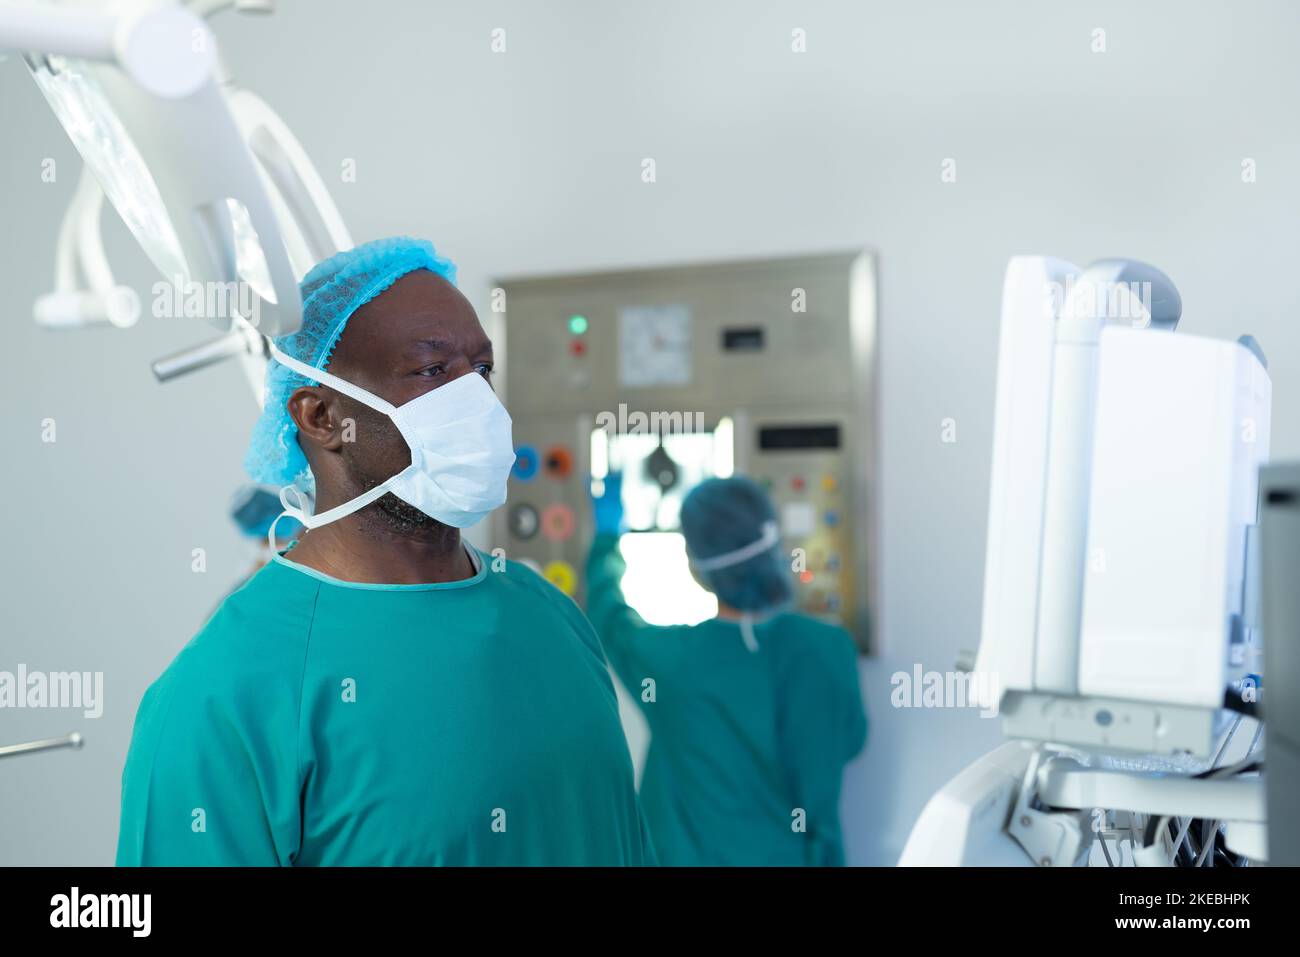 African american male surgeon studying computerised medical equipment in operating theatre. Hospital, medical and healthcare services. Stock Photo